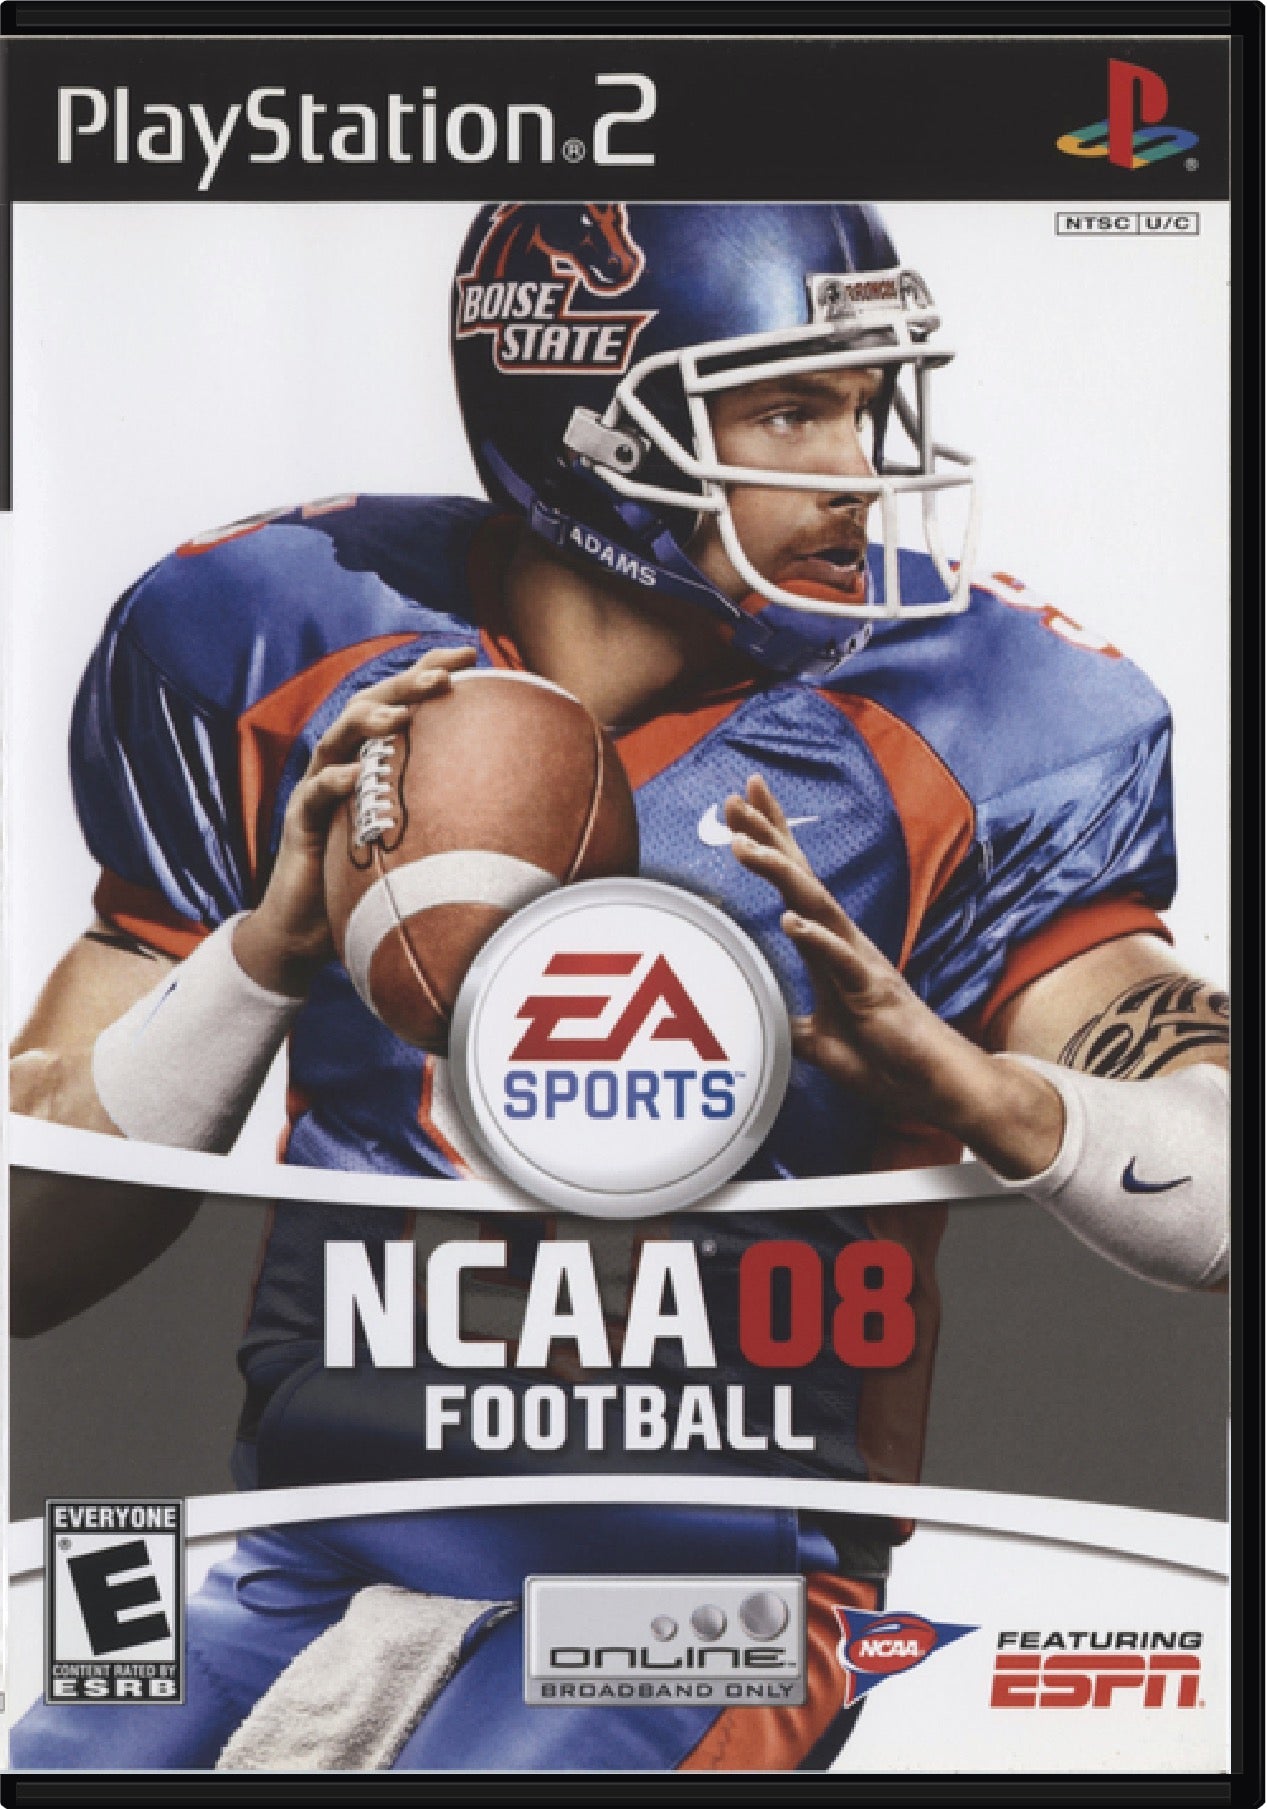 NCAA Football 08 Cover Art and Product Photo